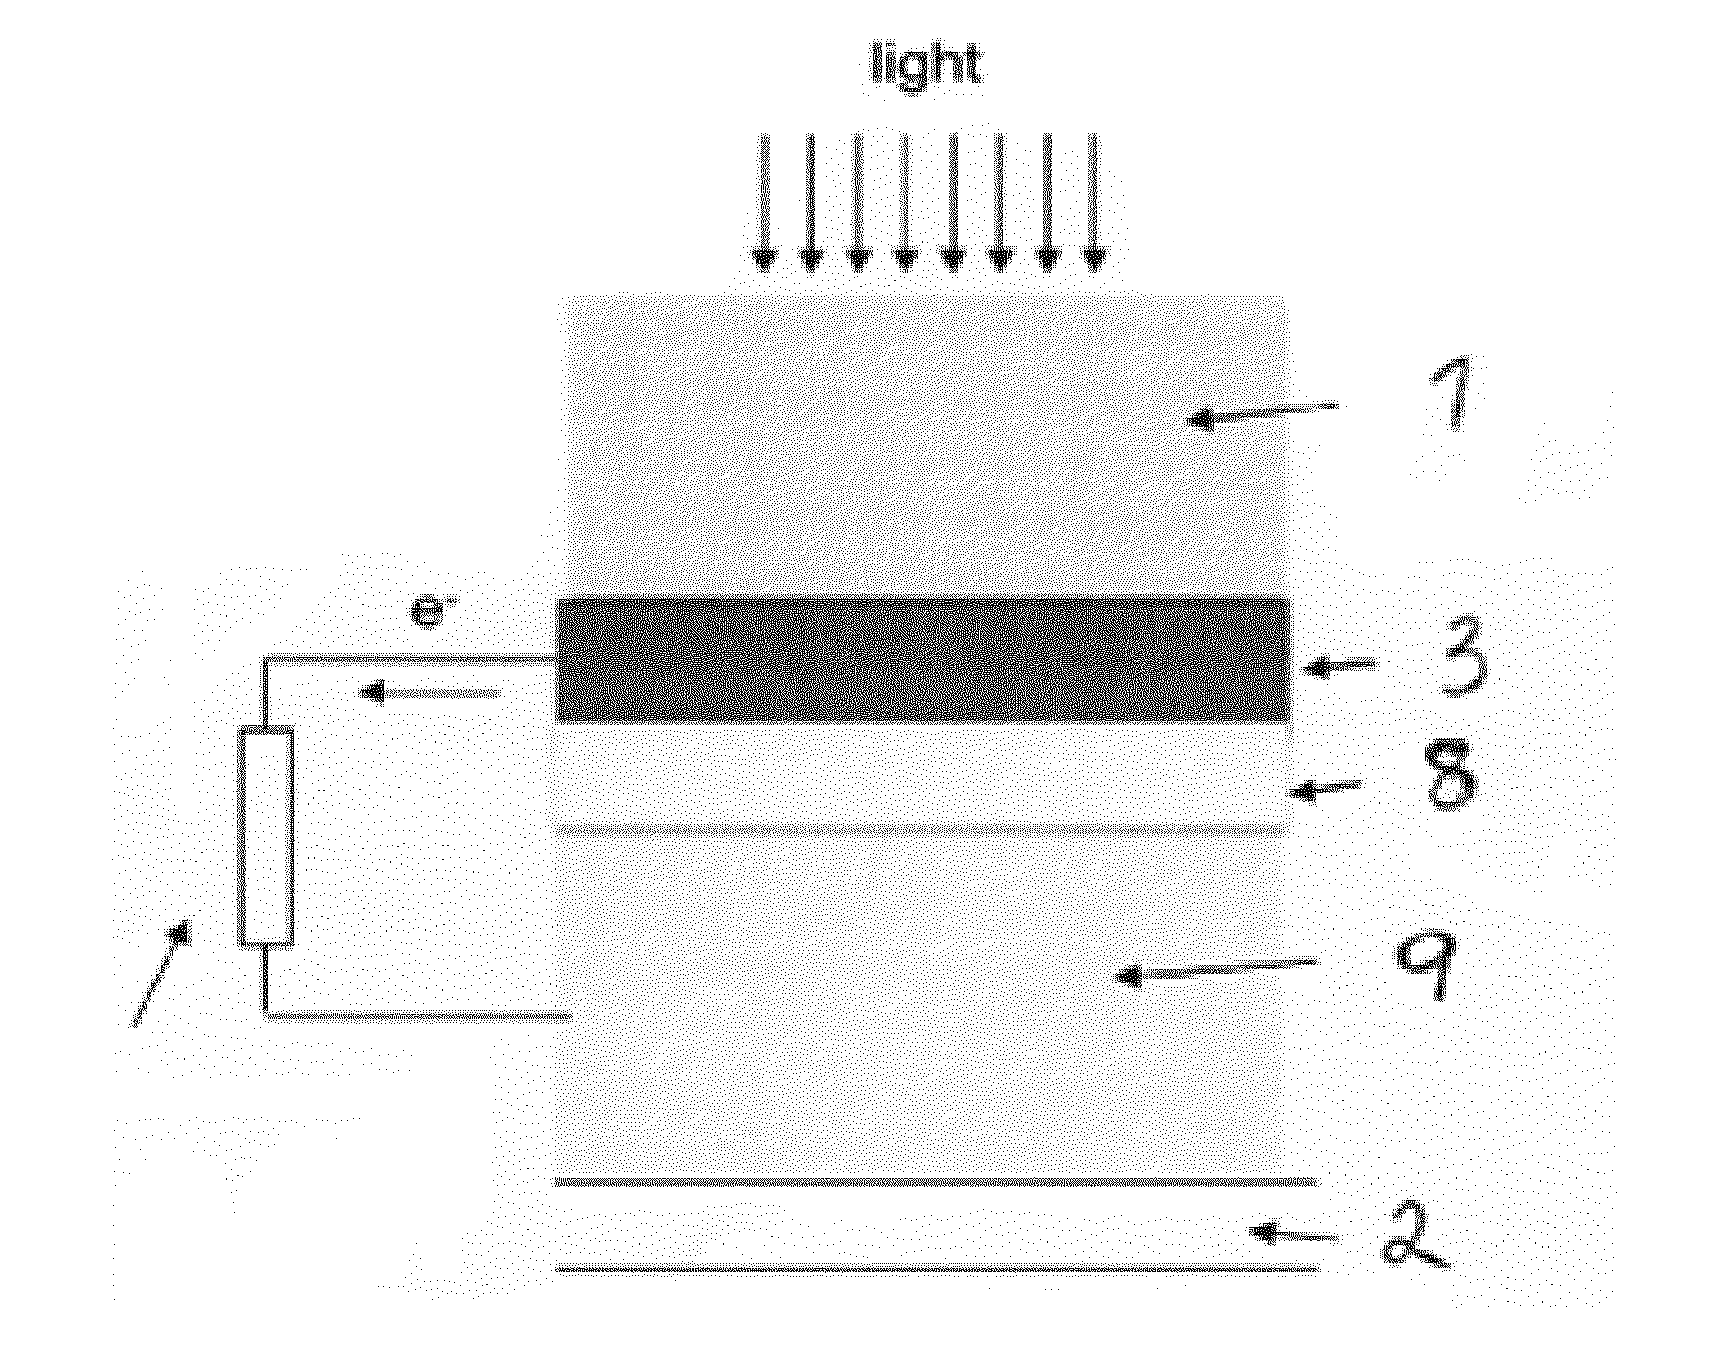 Method for manufacturing dye-sensitized solar cells and solar cells so produced